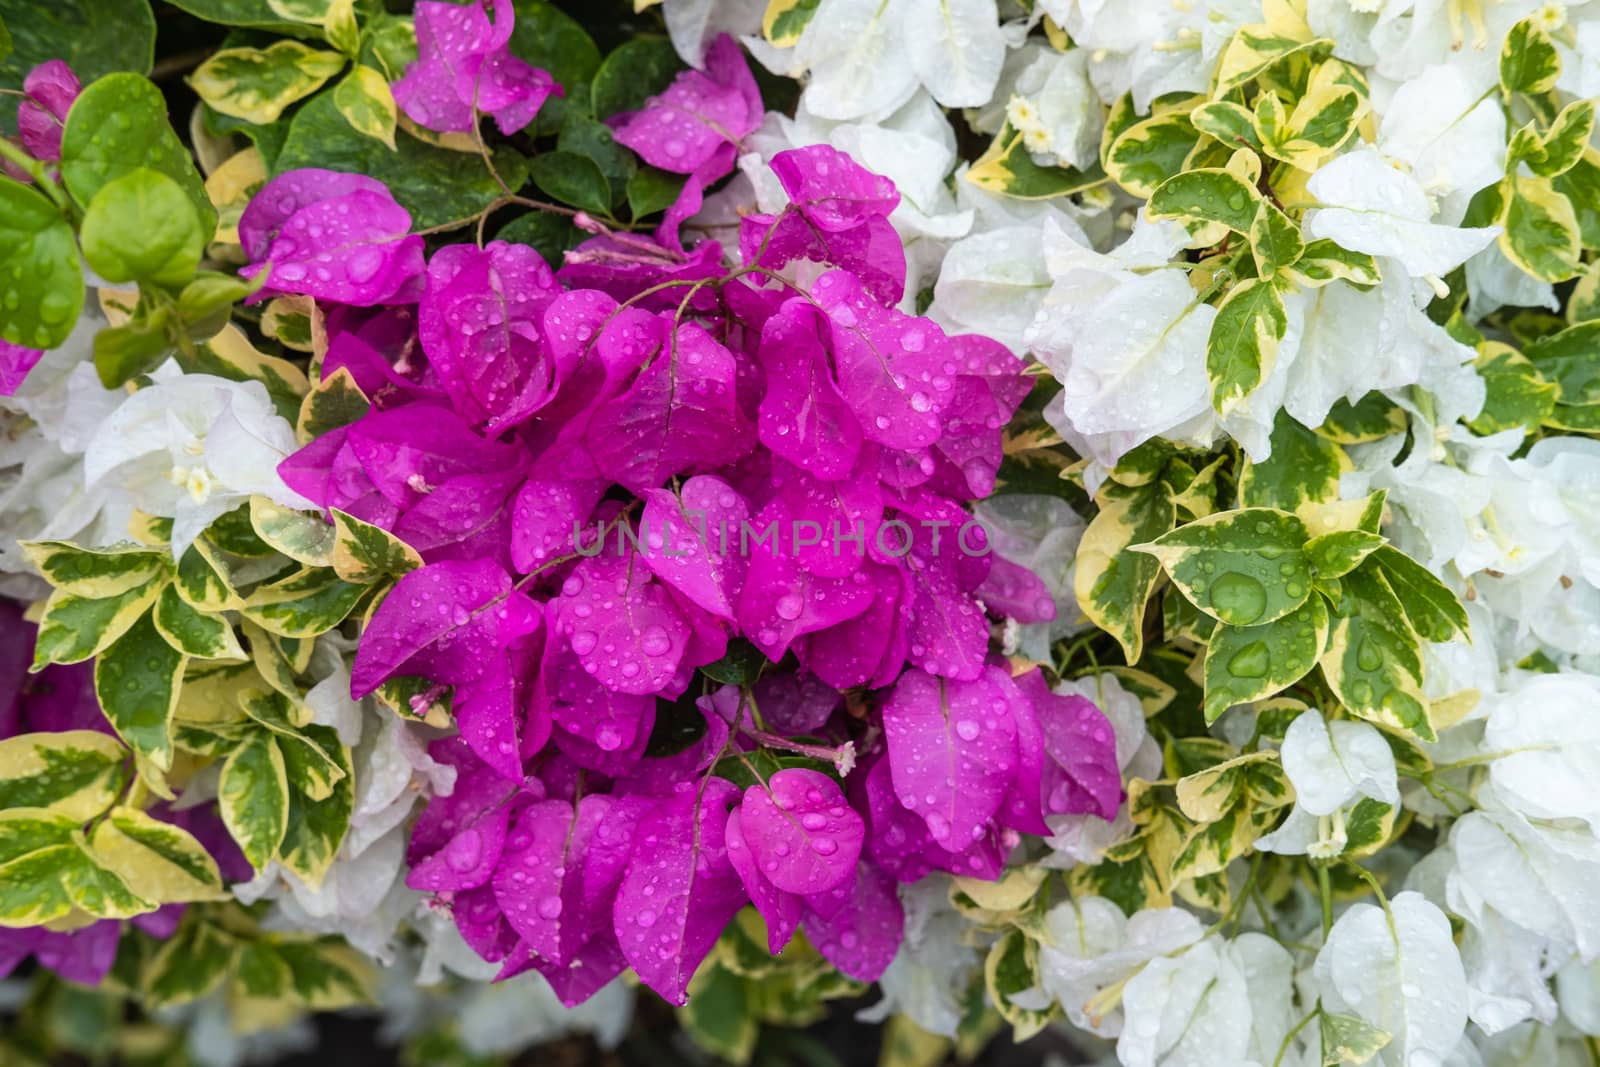  Blooming purple and white bougainvillea flowers with raindrops. Beautiful colorful bougainvilleas floral background. Selective focus closeup.